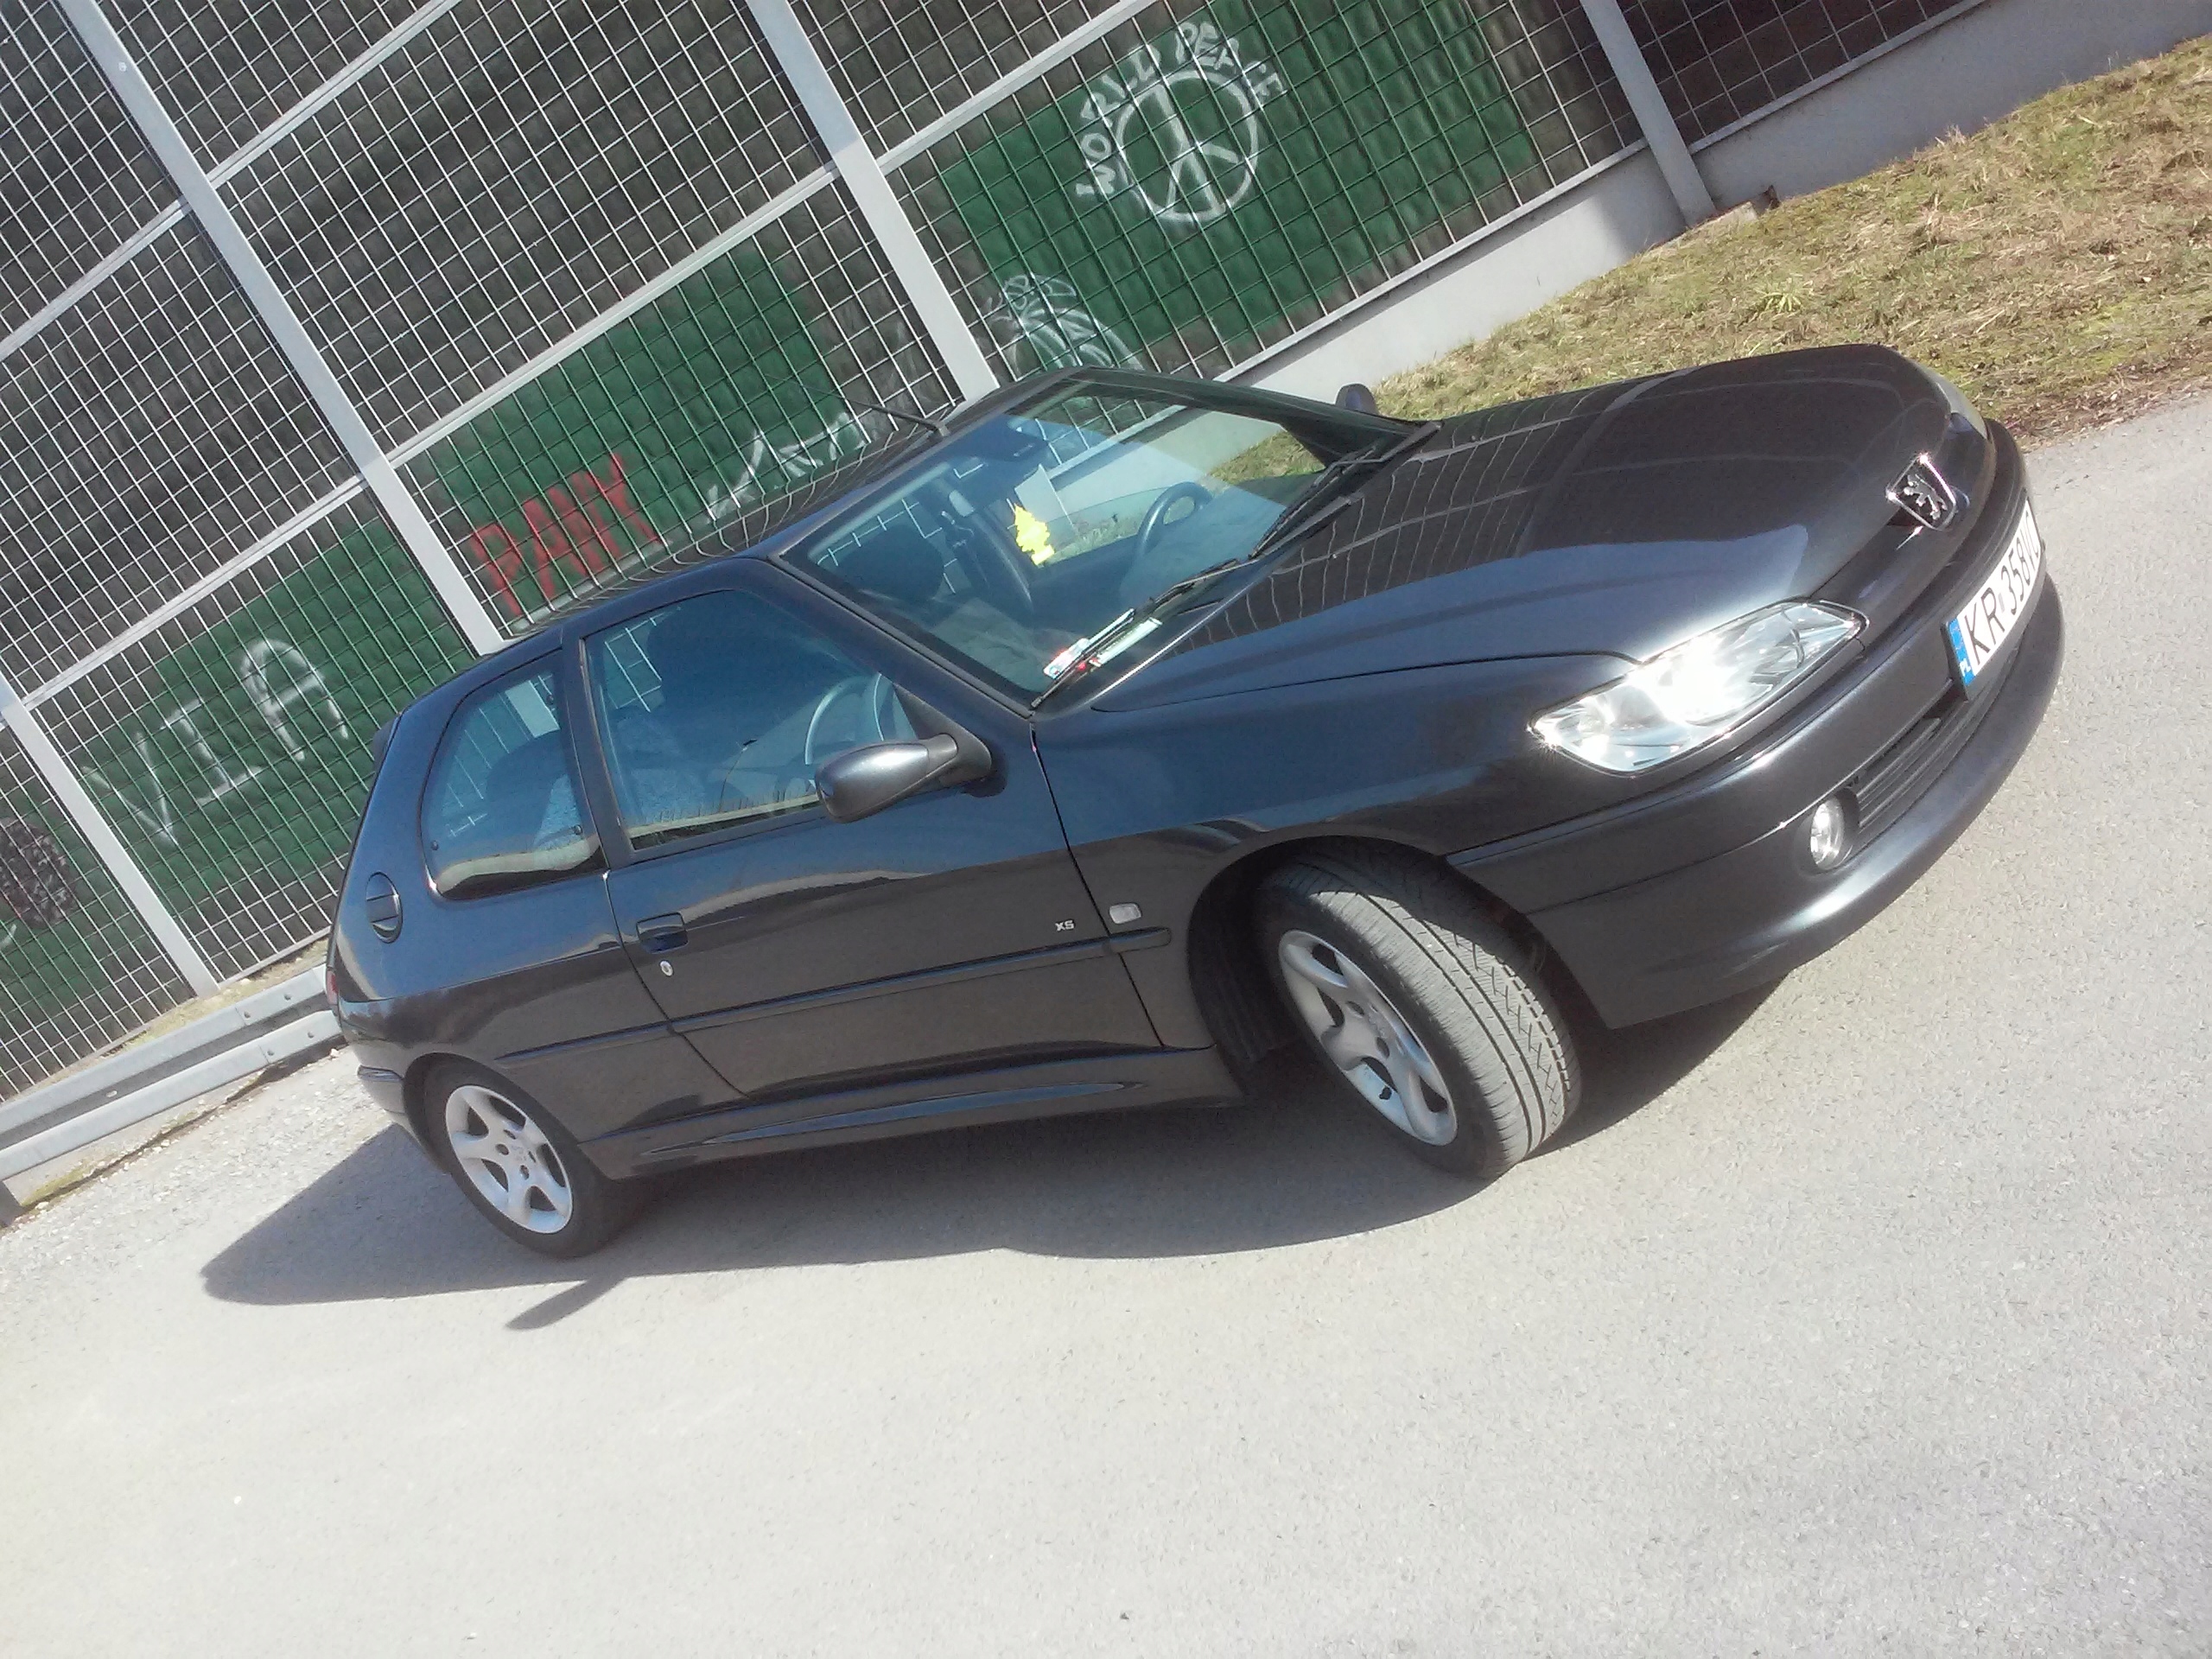 Peugeot 306 XS 1.8 16V benzyna 2000r 3D 8056757165